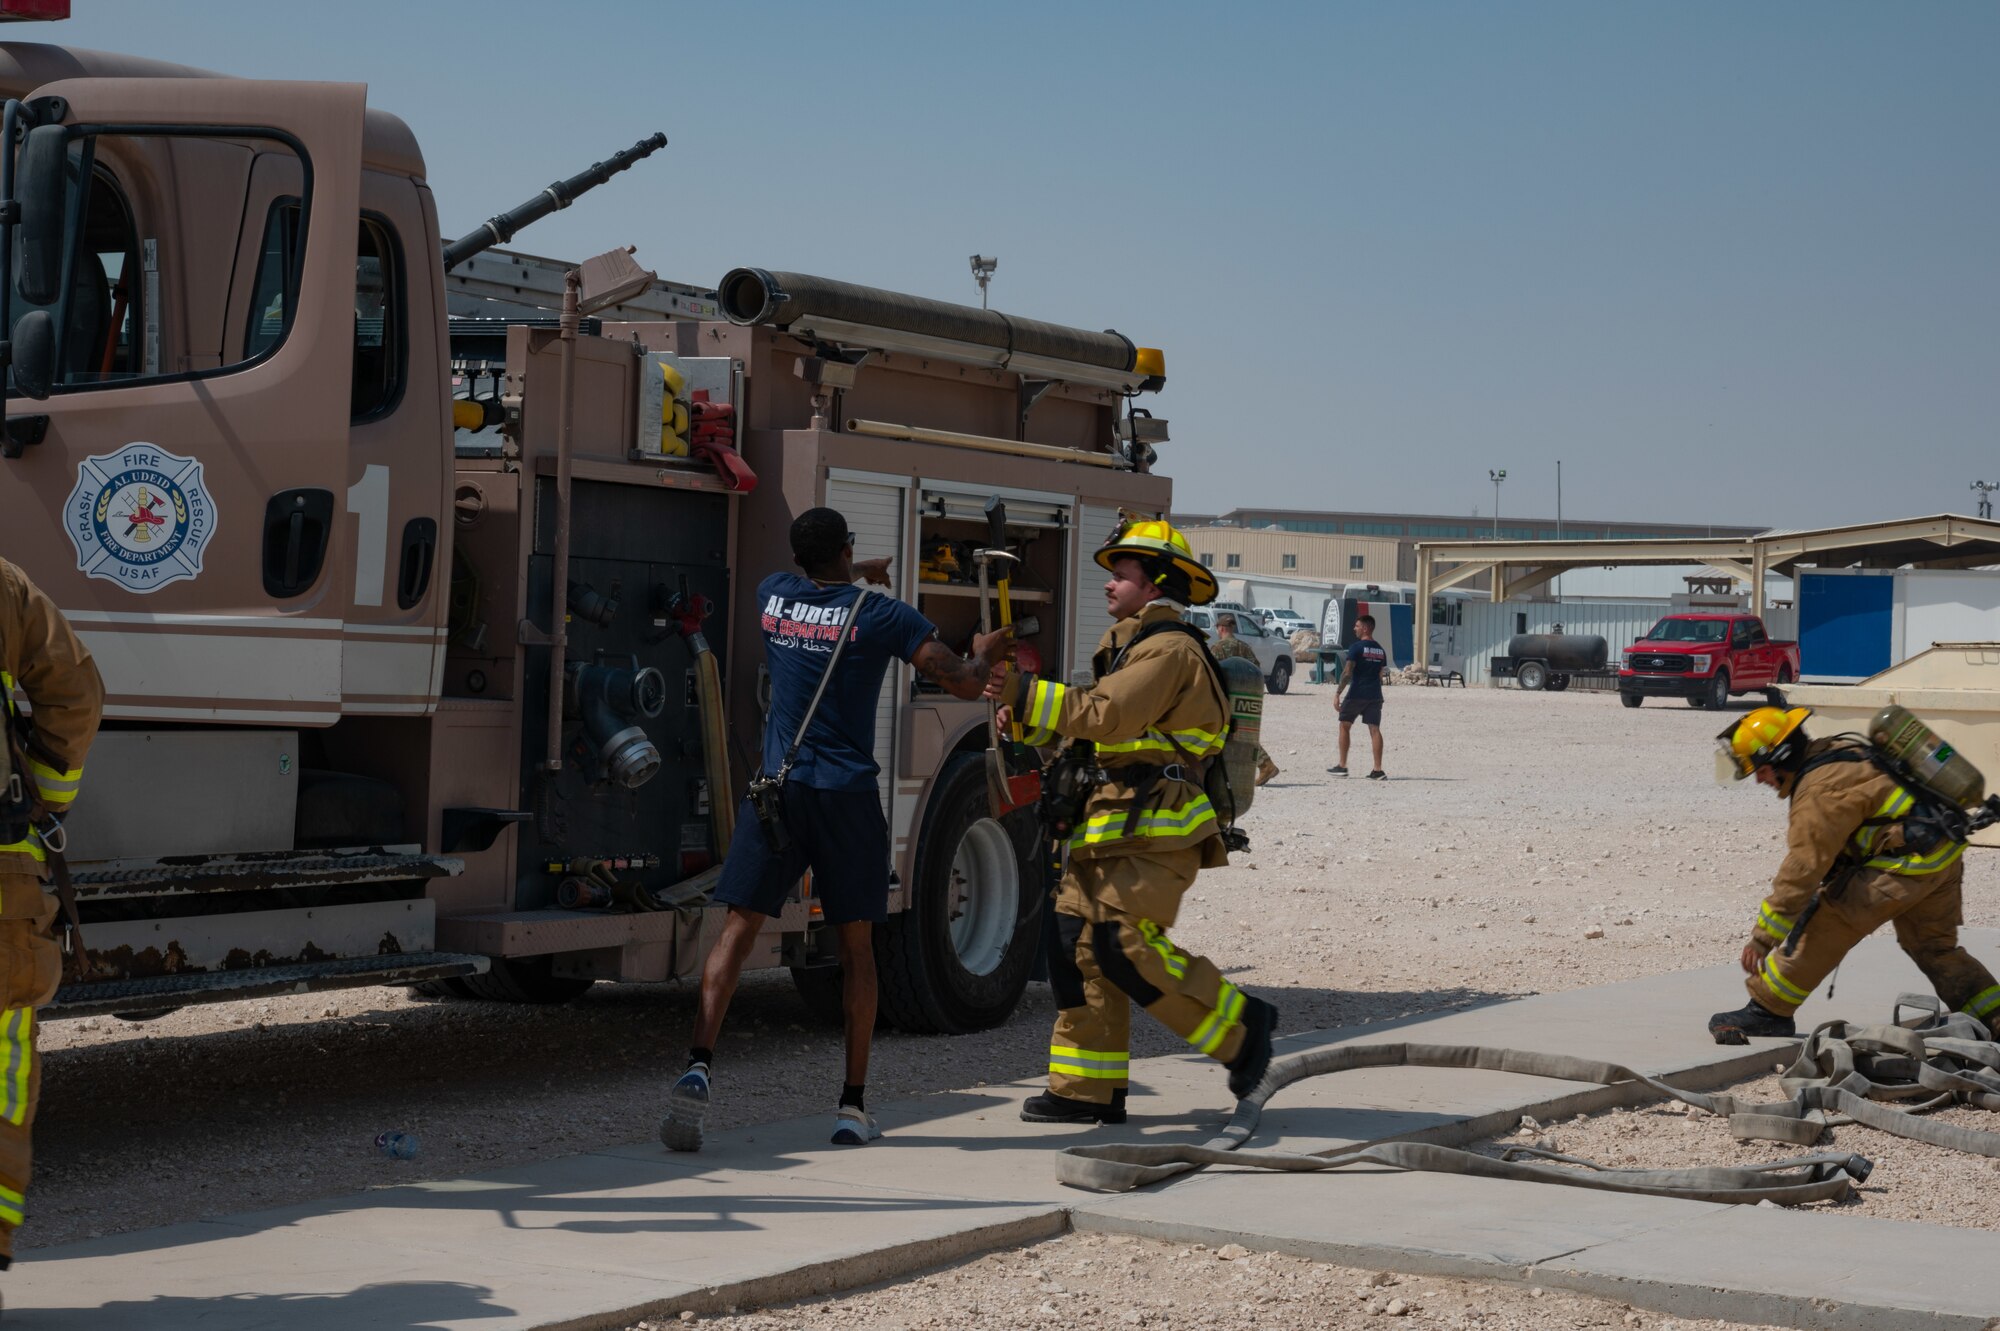 U.S. Air Force firefighters assigned to the 379th Expeditionary Civil Engineer Squadron (center) exchange a flat head axe and halligan bar while another firefighter assists in stretching out the firehose (right) during an exercise Aug. 30, 2022 at Al Udeid Air Base, Qatar. The tools exchanged between driver and operator were used to forcibly enter sealed rooms within the structure during the exercise. (U.S. Air Force photo by Staff Sgt. Dana Tourtellotte)